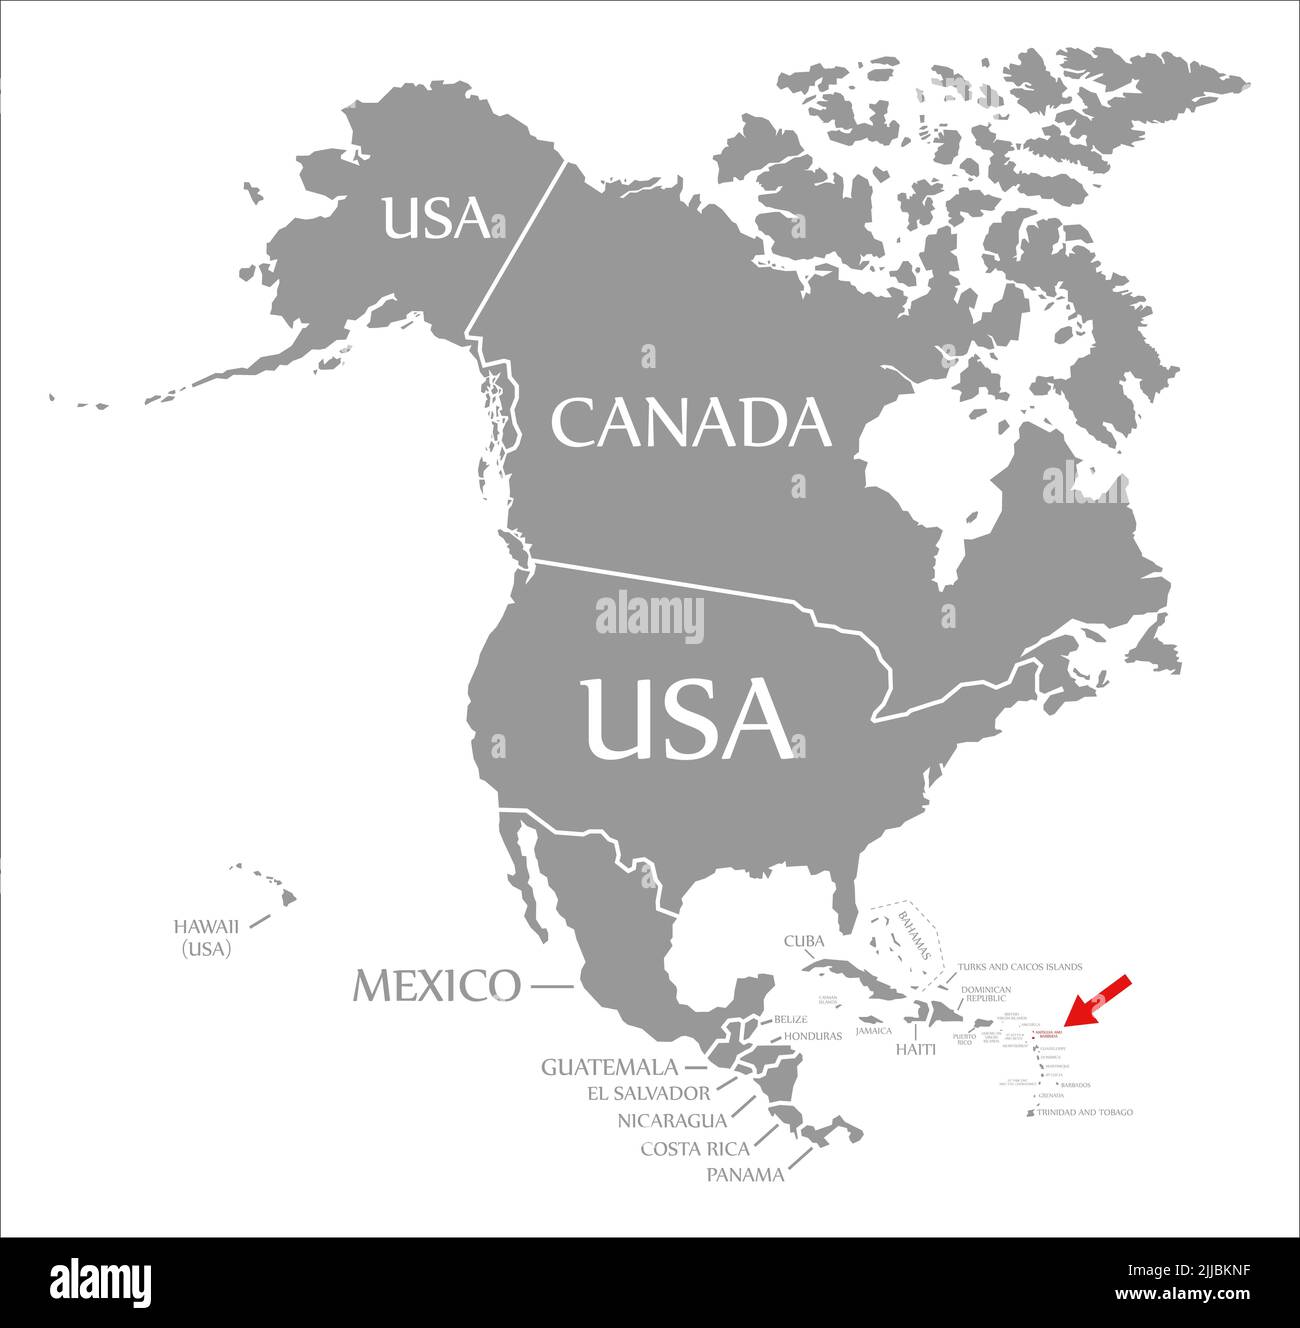 Antigua and Barbuda red highlighted in map of North America Stock Photo